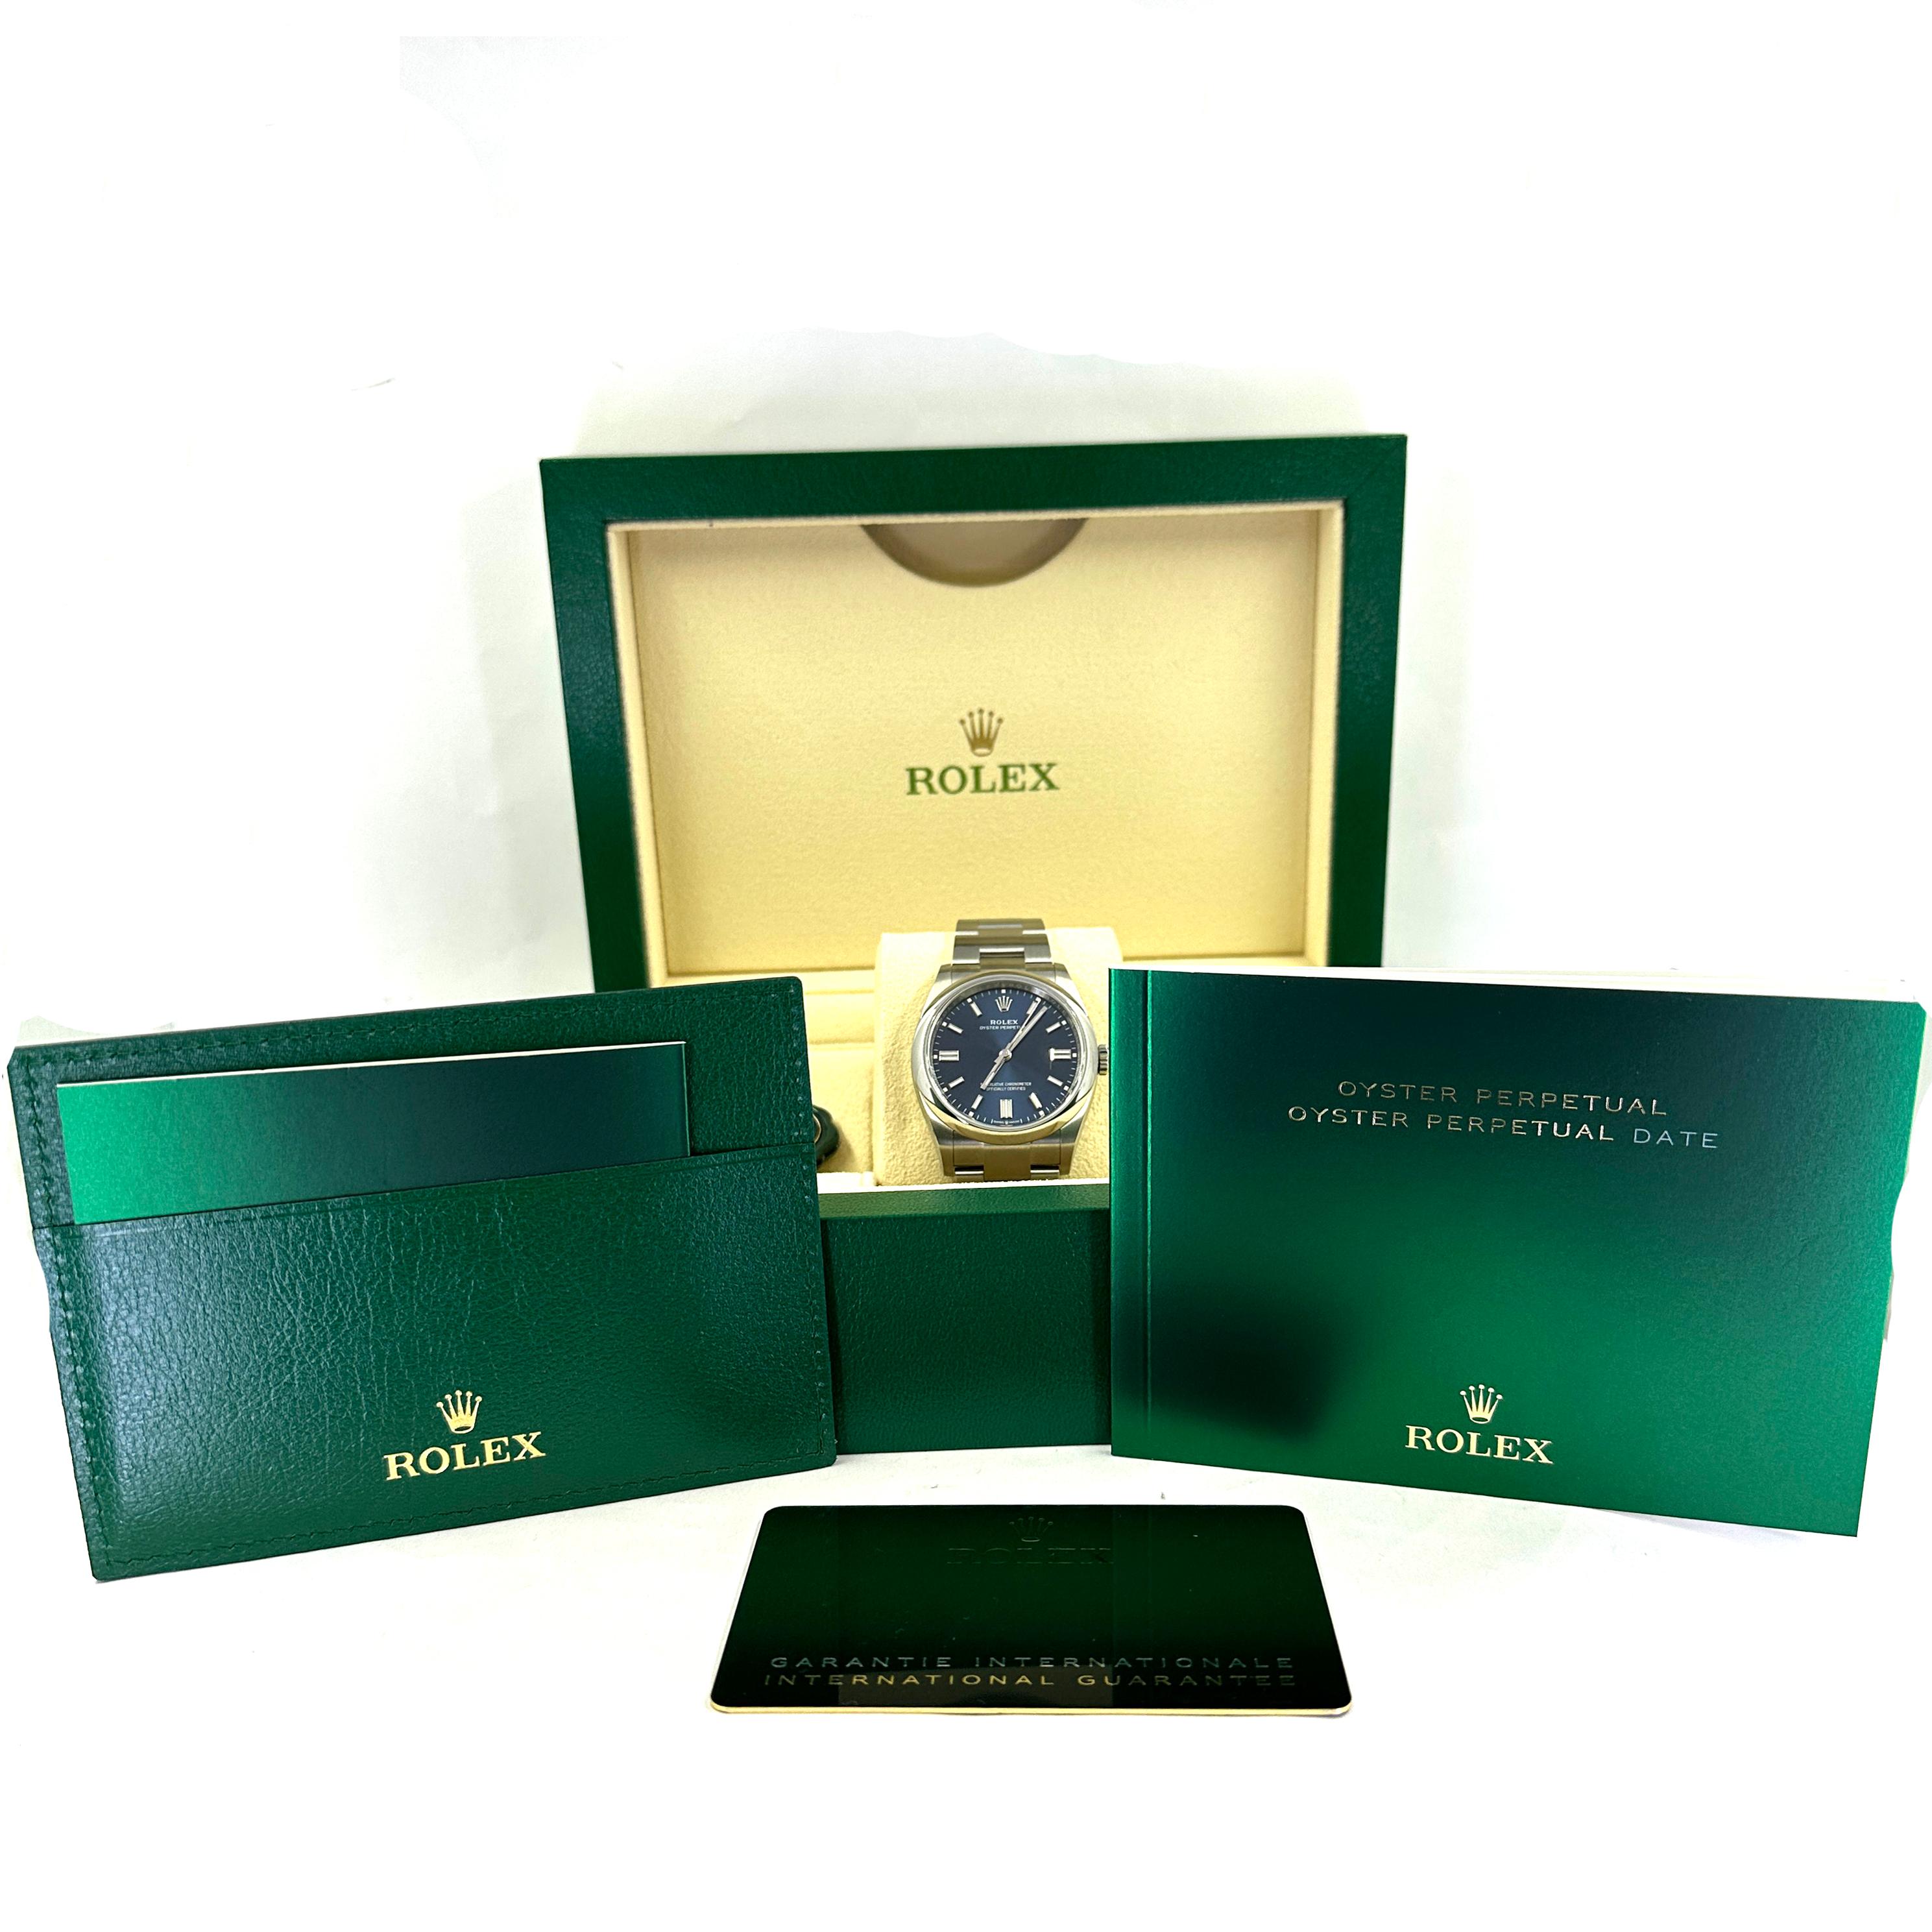 Rolex Oyster Perpetual Blue Dial 36mm comme neuf en vente 6